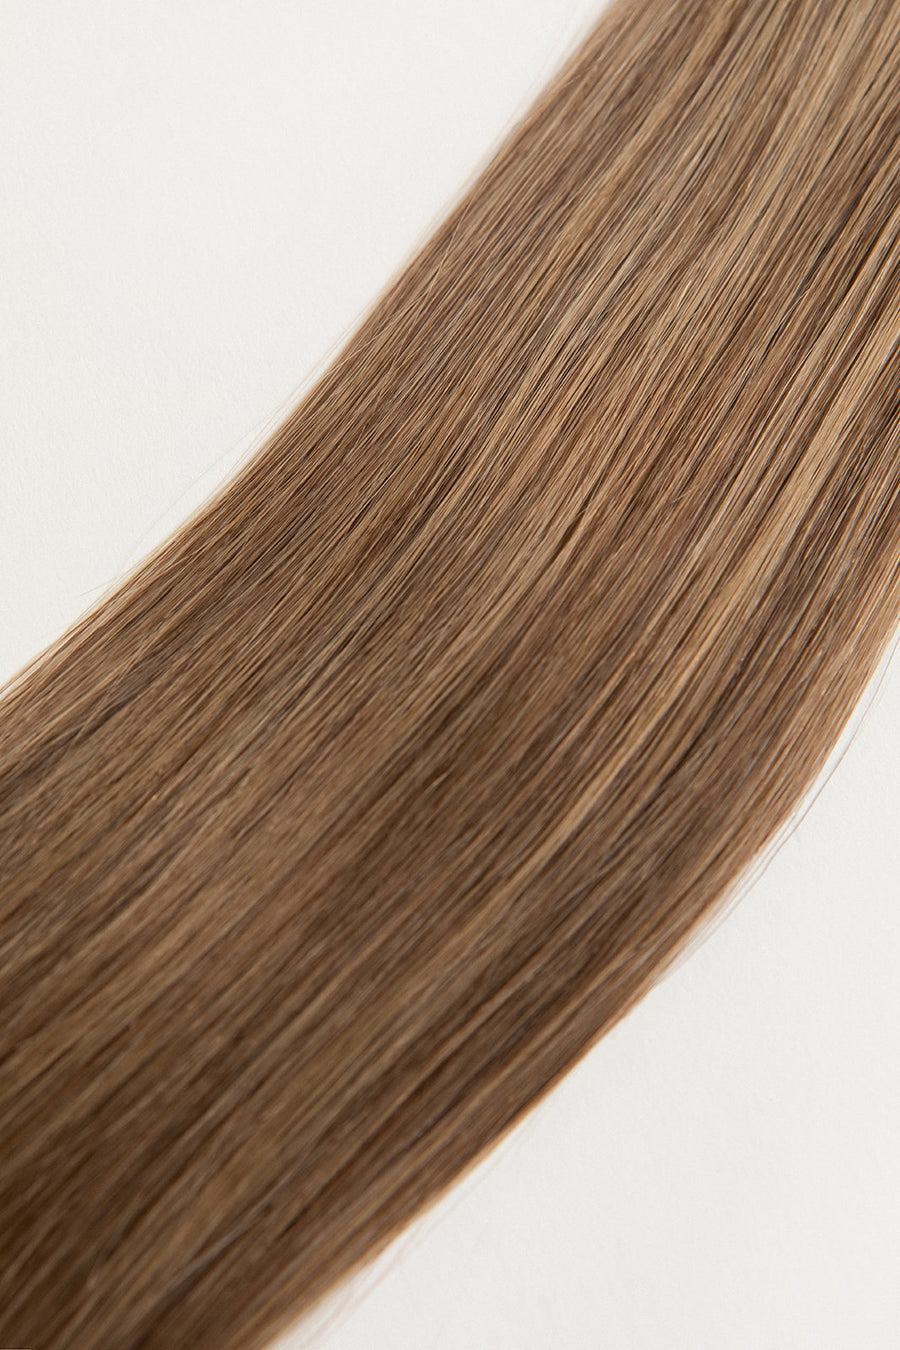 Spiced Suede is our flawless balayage brunette blend.  Stylist lingo: Natural rooted level 6 blended into natural/gold dimensional levels 6 & 9 Harloc Tape-In Extensions are made from ethically sourced, premium, Remy Slavic Hair. These reusable hair extensions can be used to add length, volume, chemical-free colour, or to correct or enhance a haircut. Available in 16 beautiful shades. Combine multiple colours to create a custom colour blend and perfect match.